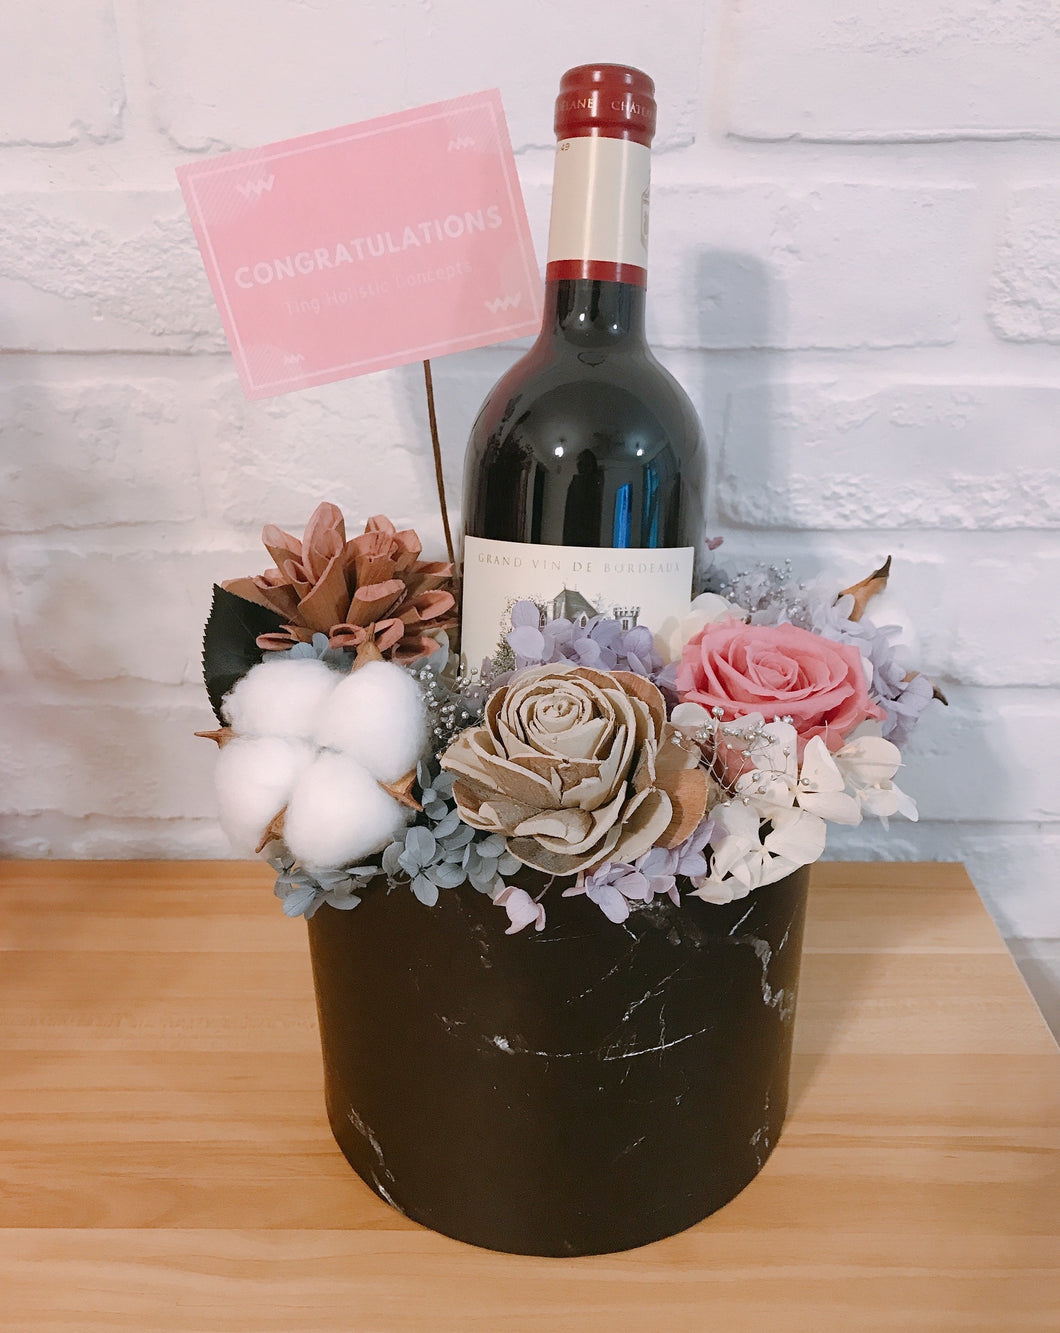 Scented flowers and wine